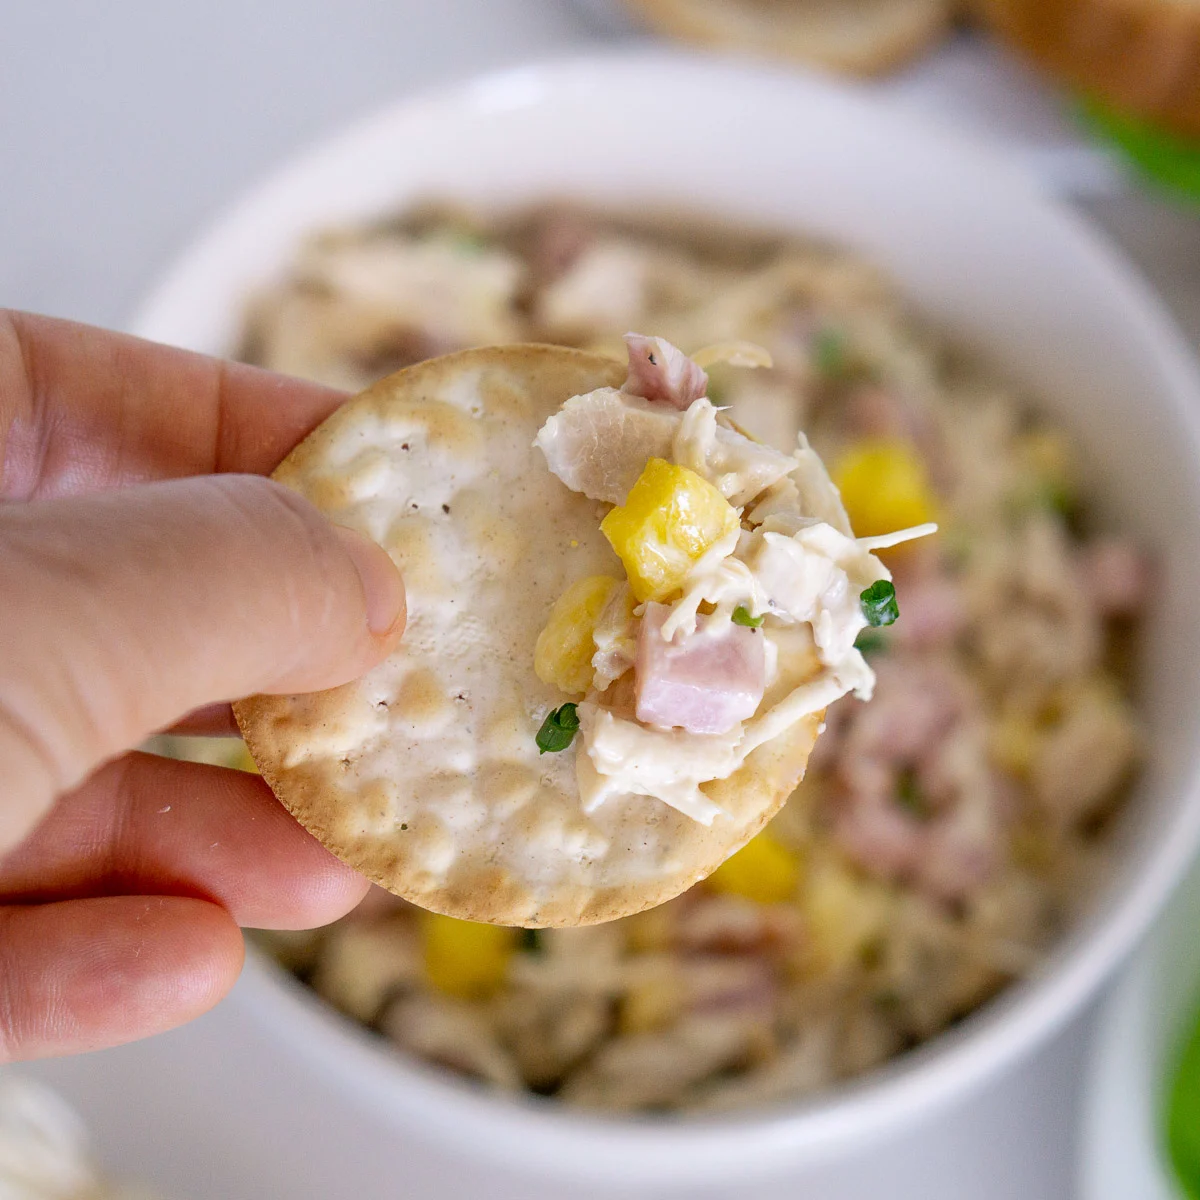 cracker dipping into hawaiian chicken salad with pineapple